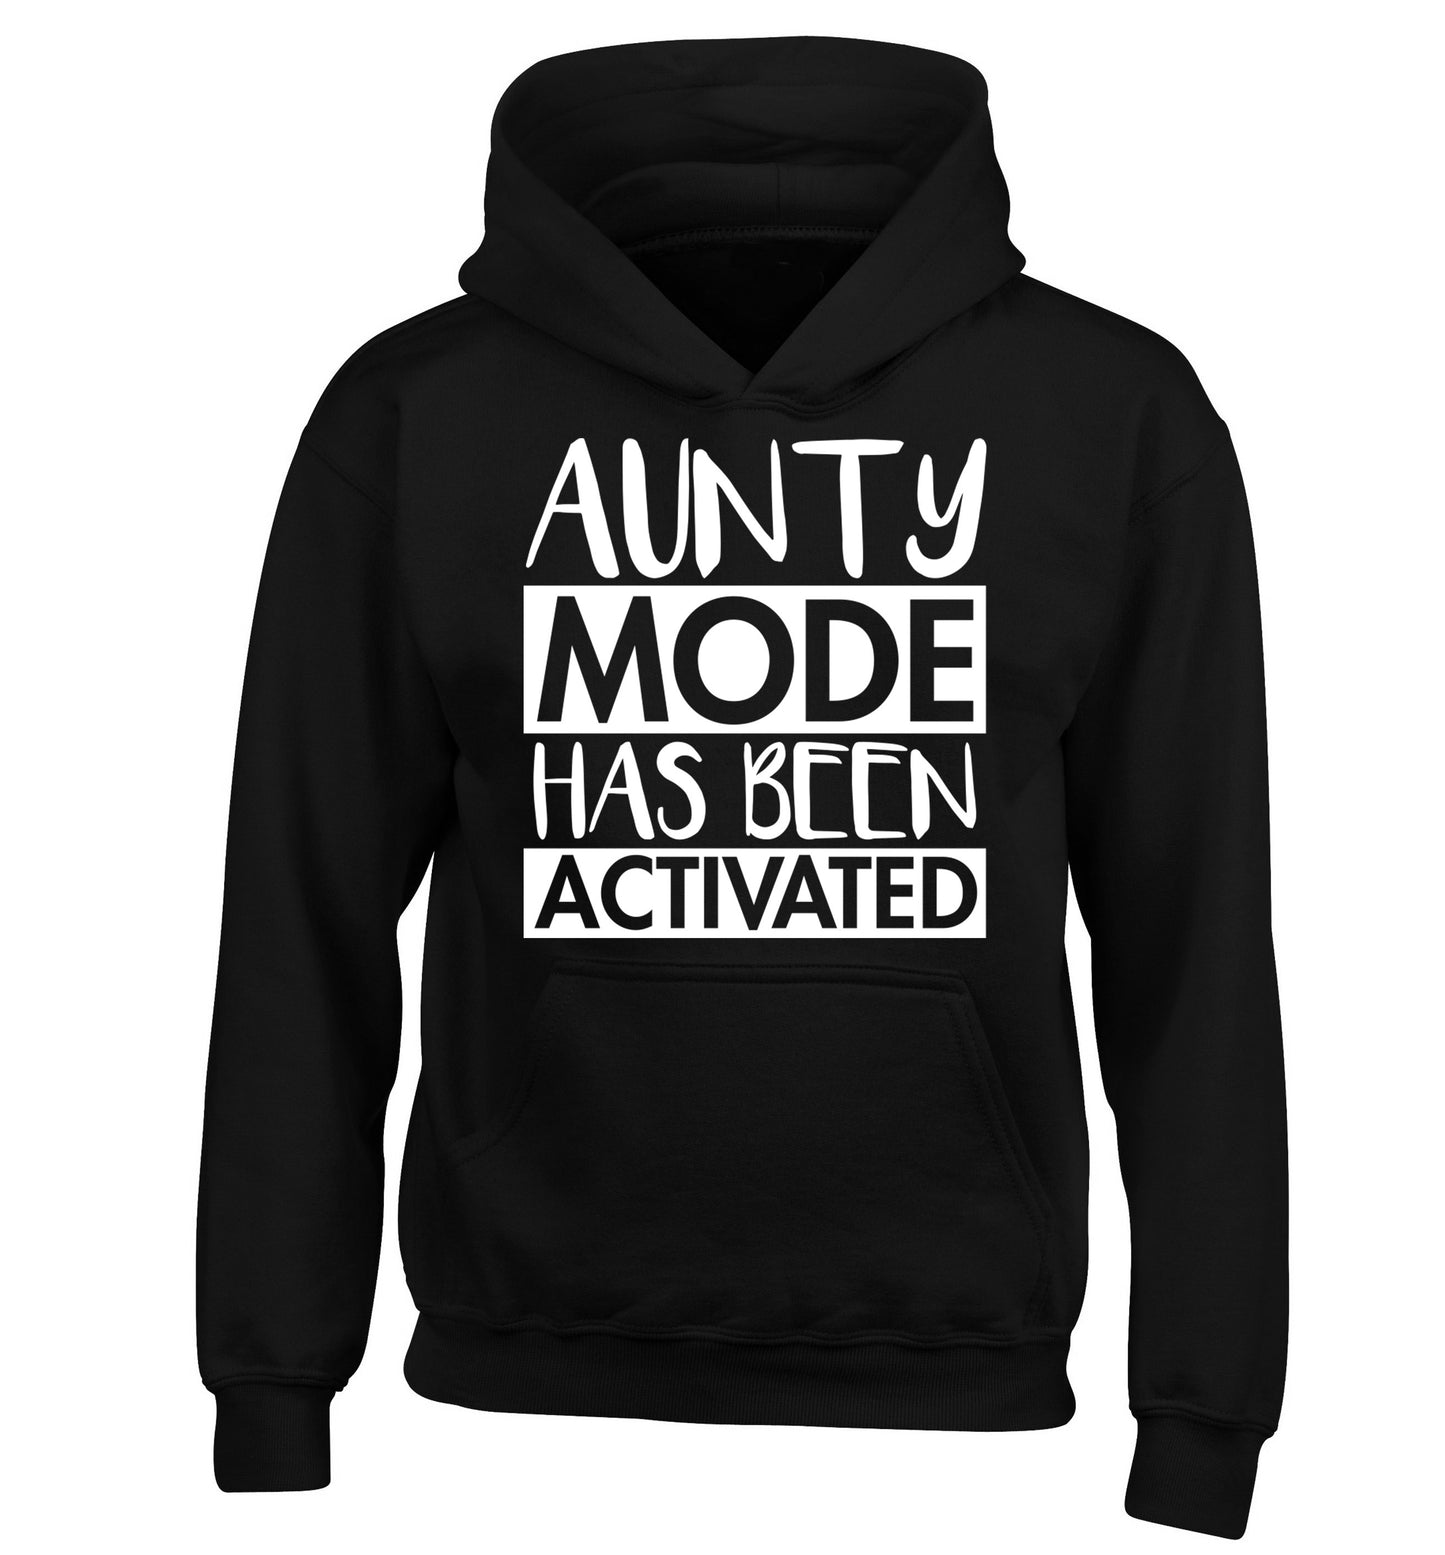 Aunty mode activated children's black hoodie 12-14 Years